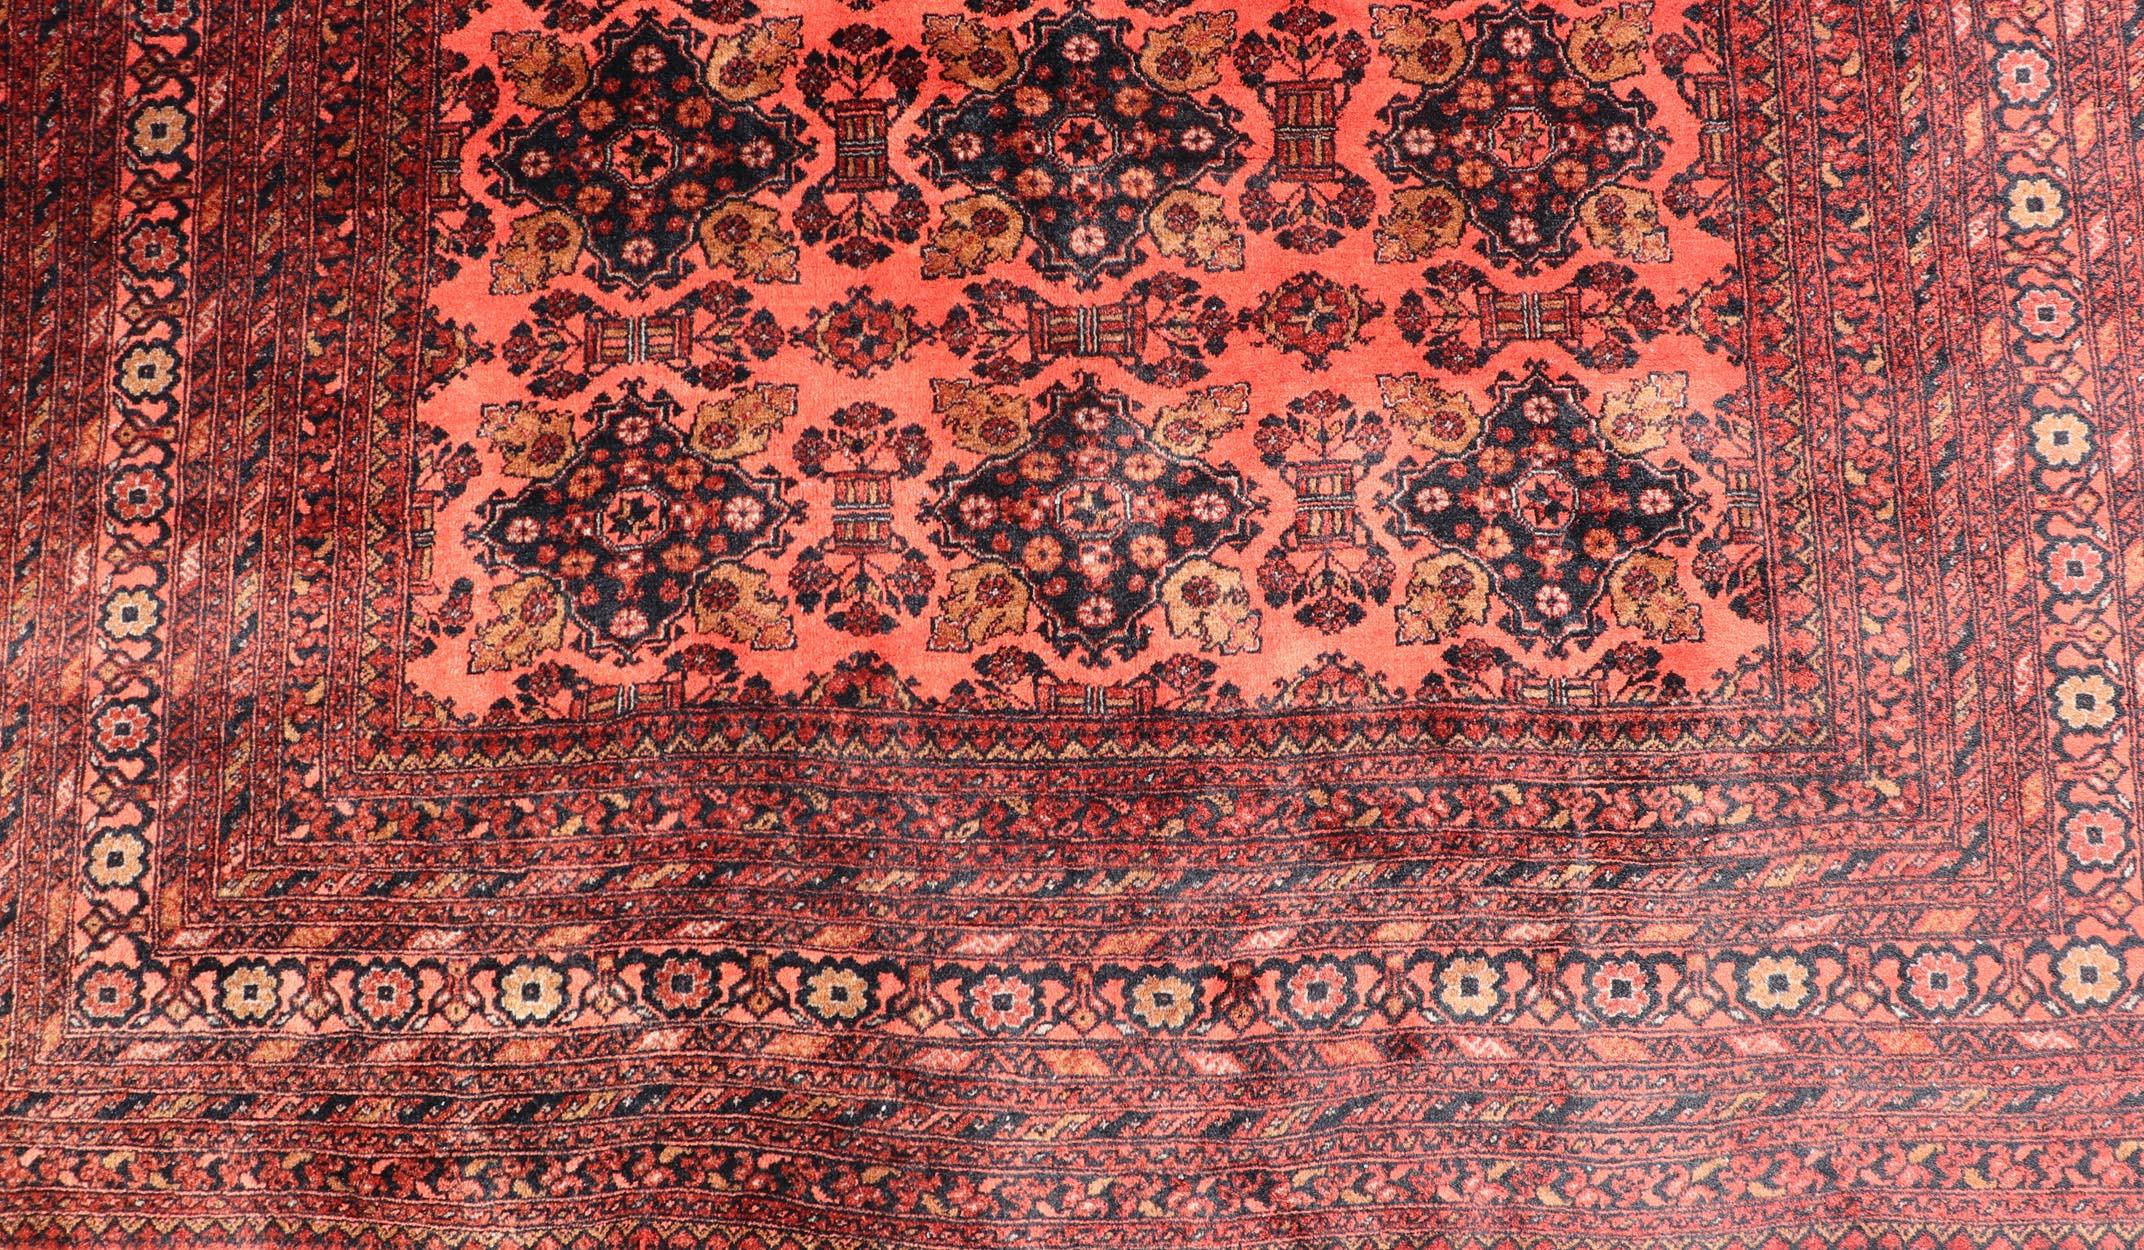 Measures: 6'8 x 9'5.

Vintage Hand Knotted Tukomen Ersari Rug in Red Background With Gul Design. Keivan Woven Arts; rug W22-0207, country of origin / type: Turkestan / Ersari, circa 1950s. Vintage Ersari

This Ersari rug has been hand-knotted in the